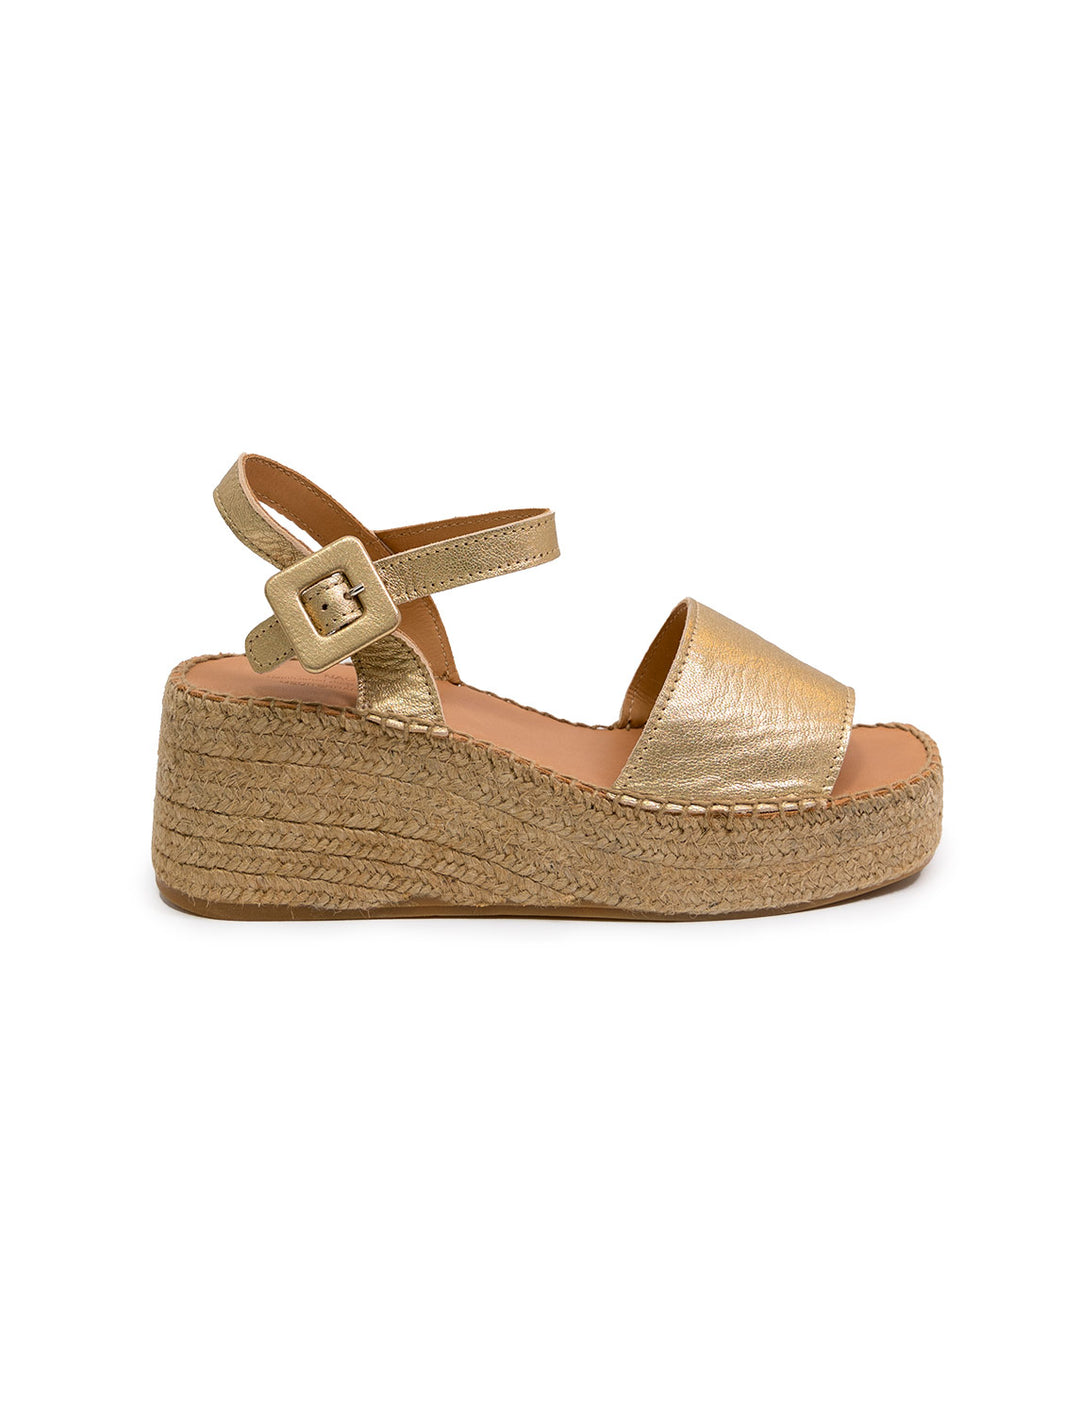 Side view of Naguisa's rall espadrille wedge in metallic gold.